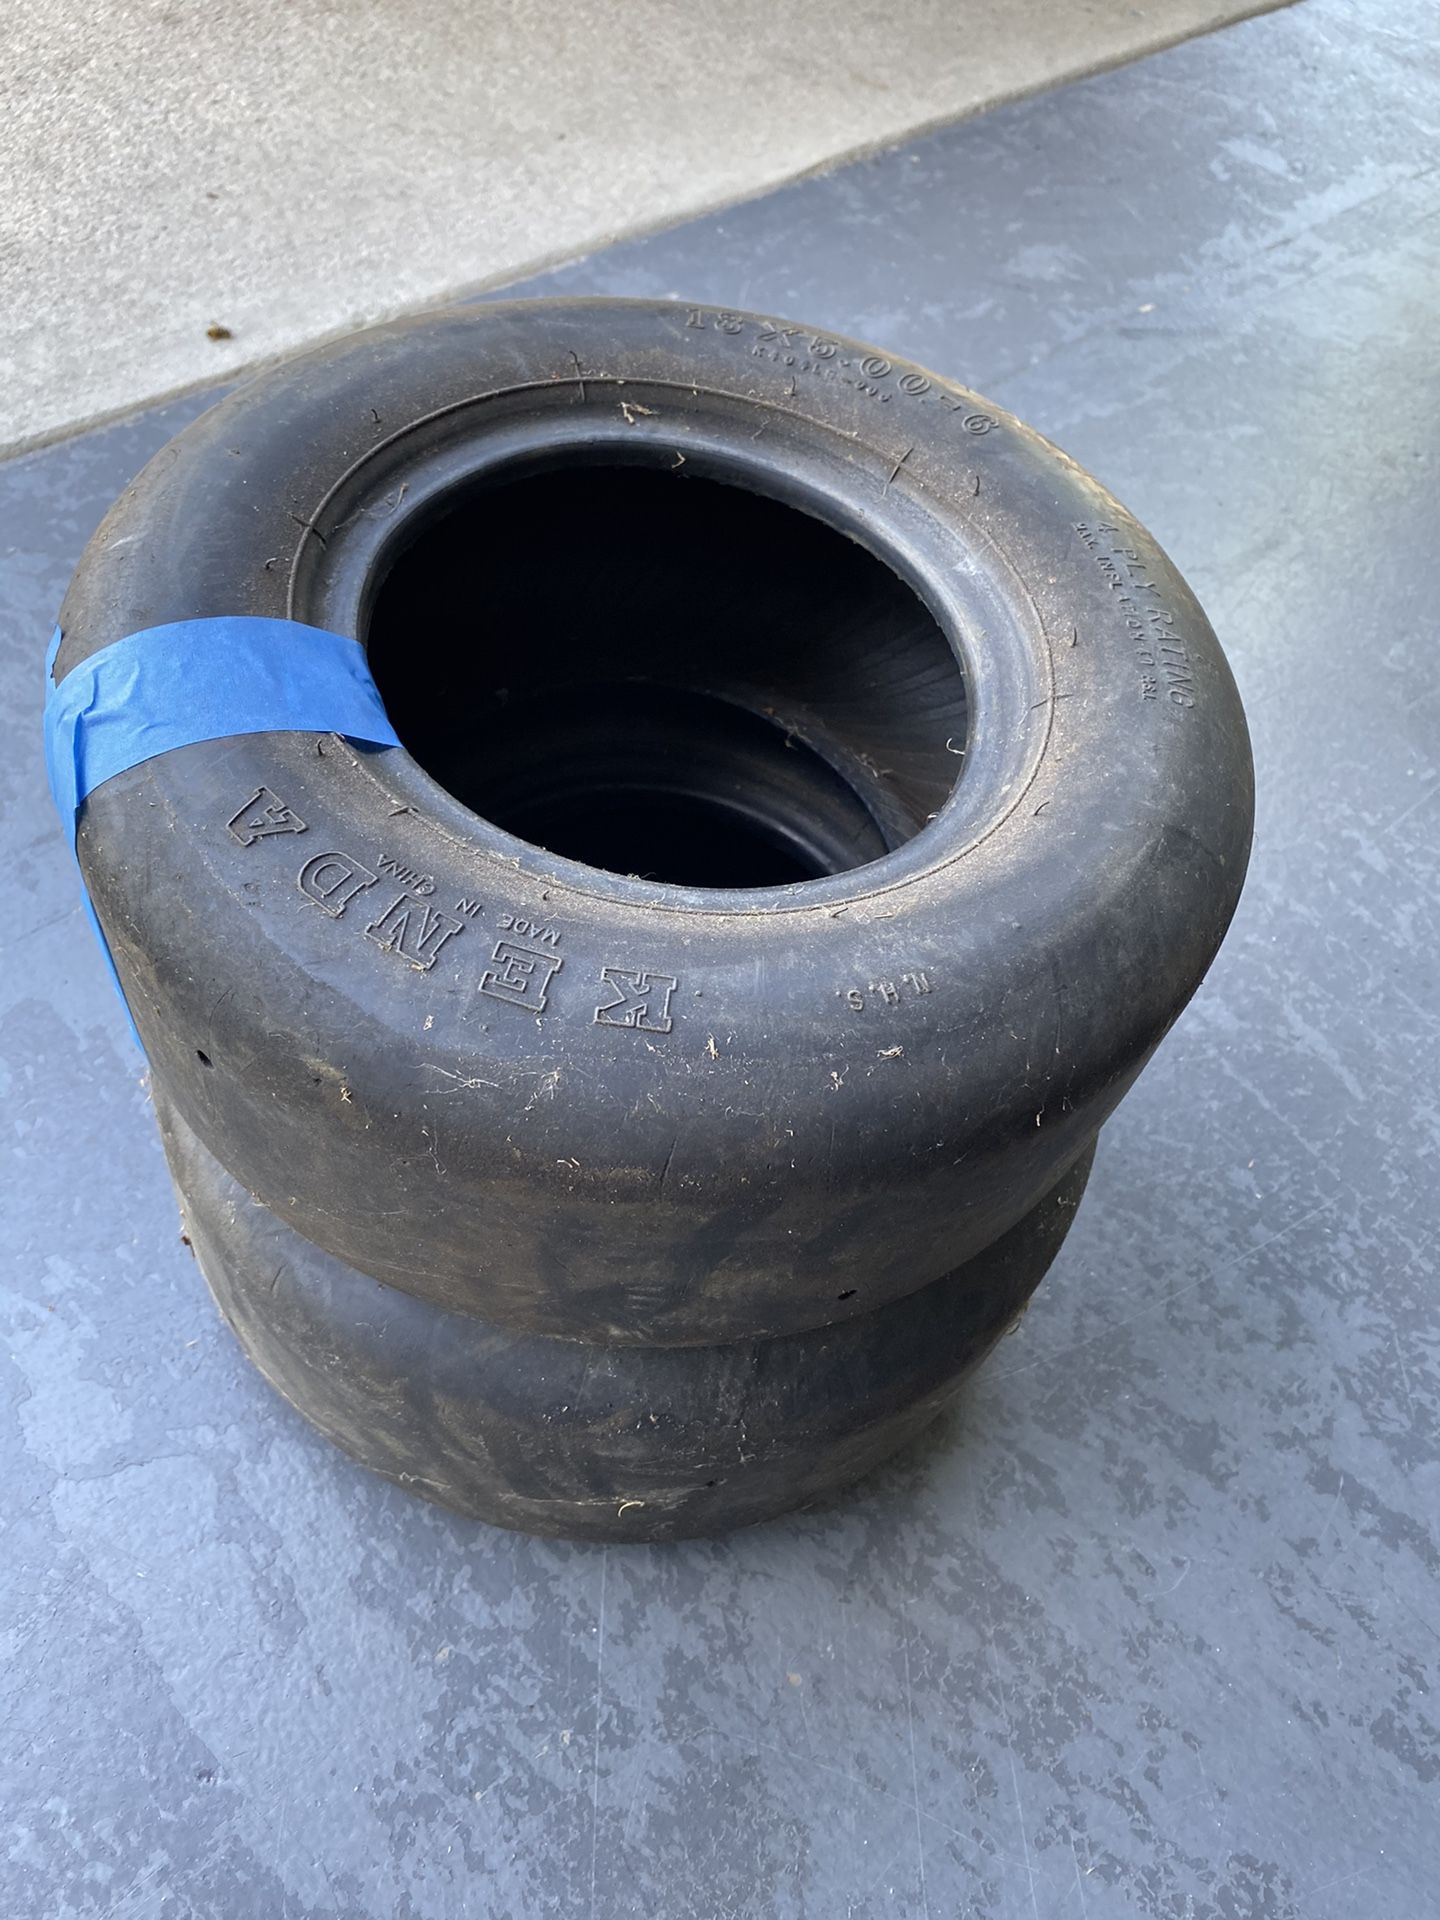 2 front lawn mower tires